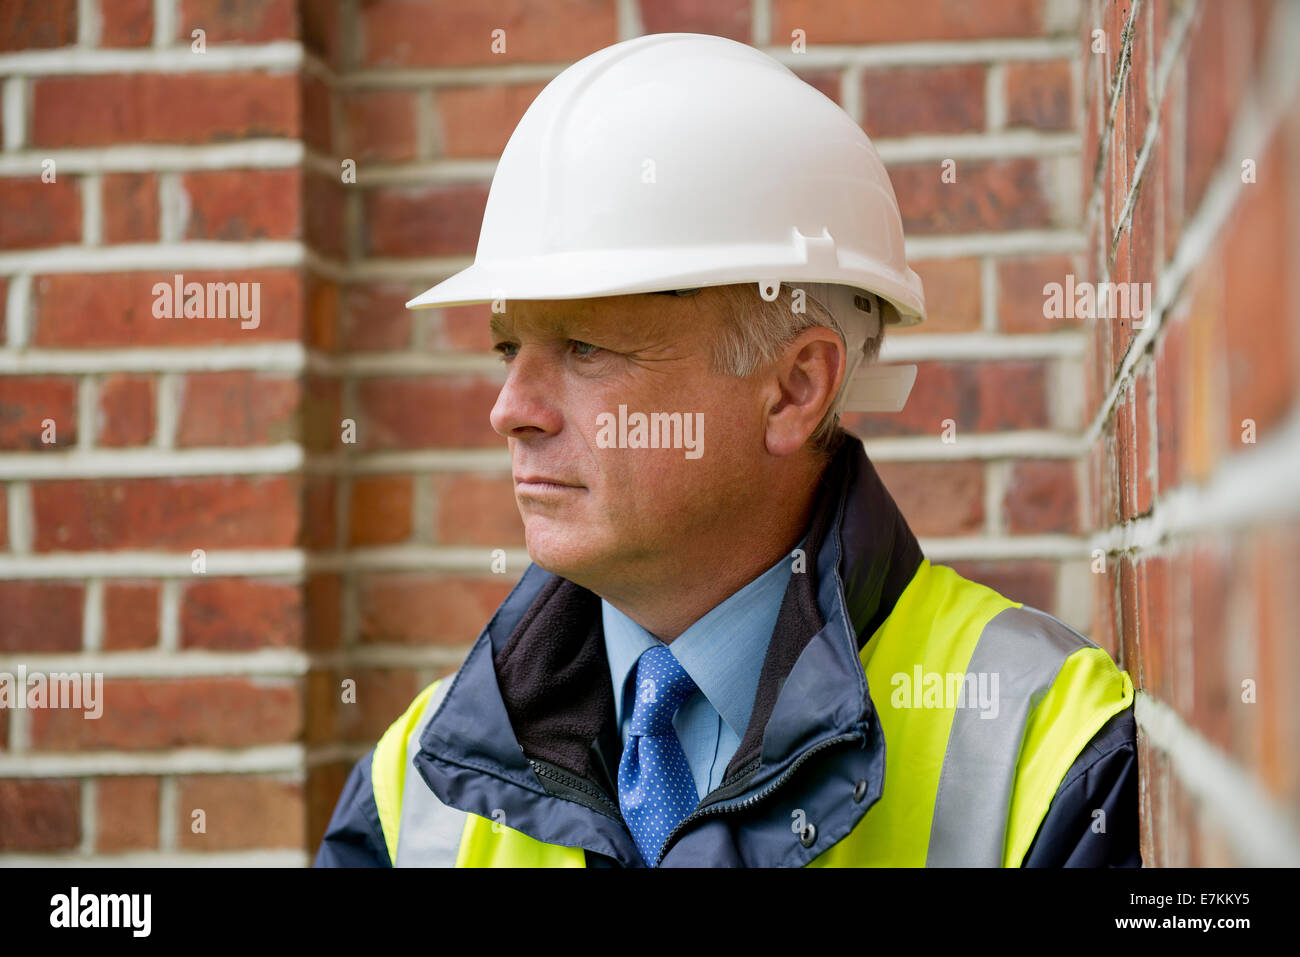 Head and shoulders portrait of a construction engineer against a brick wall background. Stock Photo